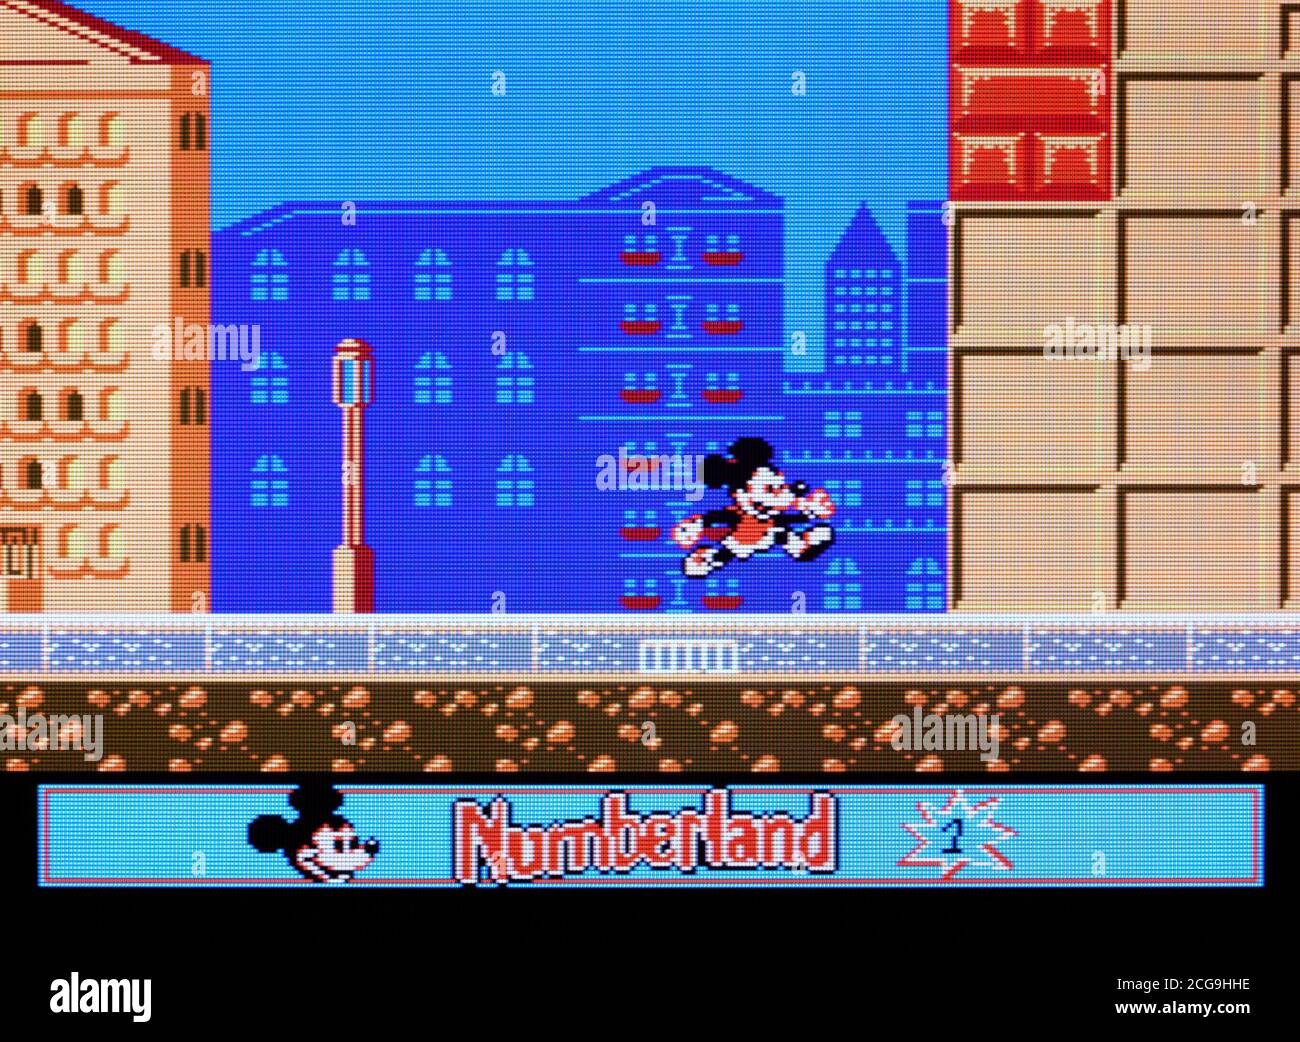 Mickey's Adventures in Numberland - Nintendo Entertainment System - NES Videogame - Editorial use only Stock Photo